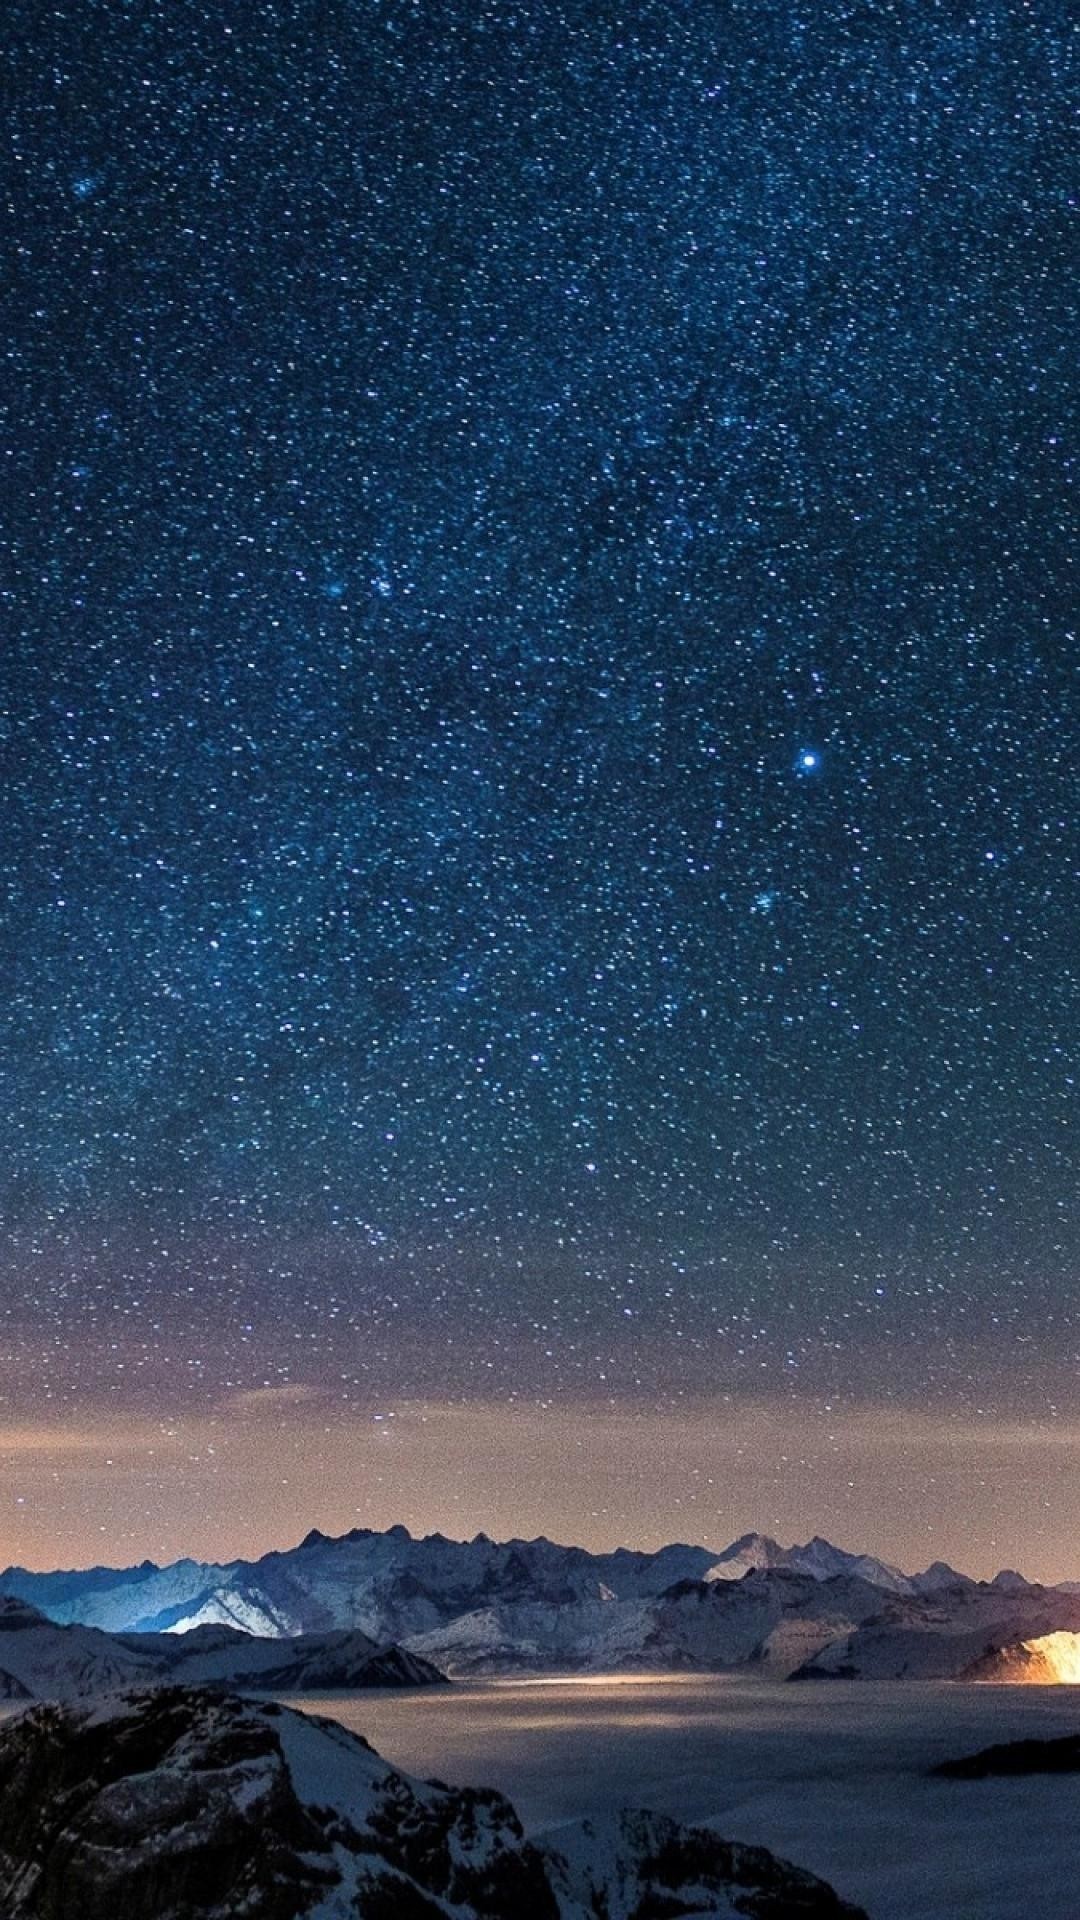 Sky iphone wallpaper high quality